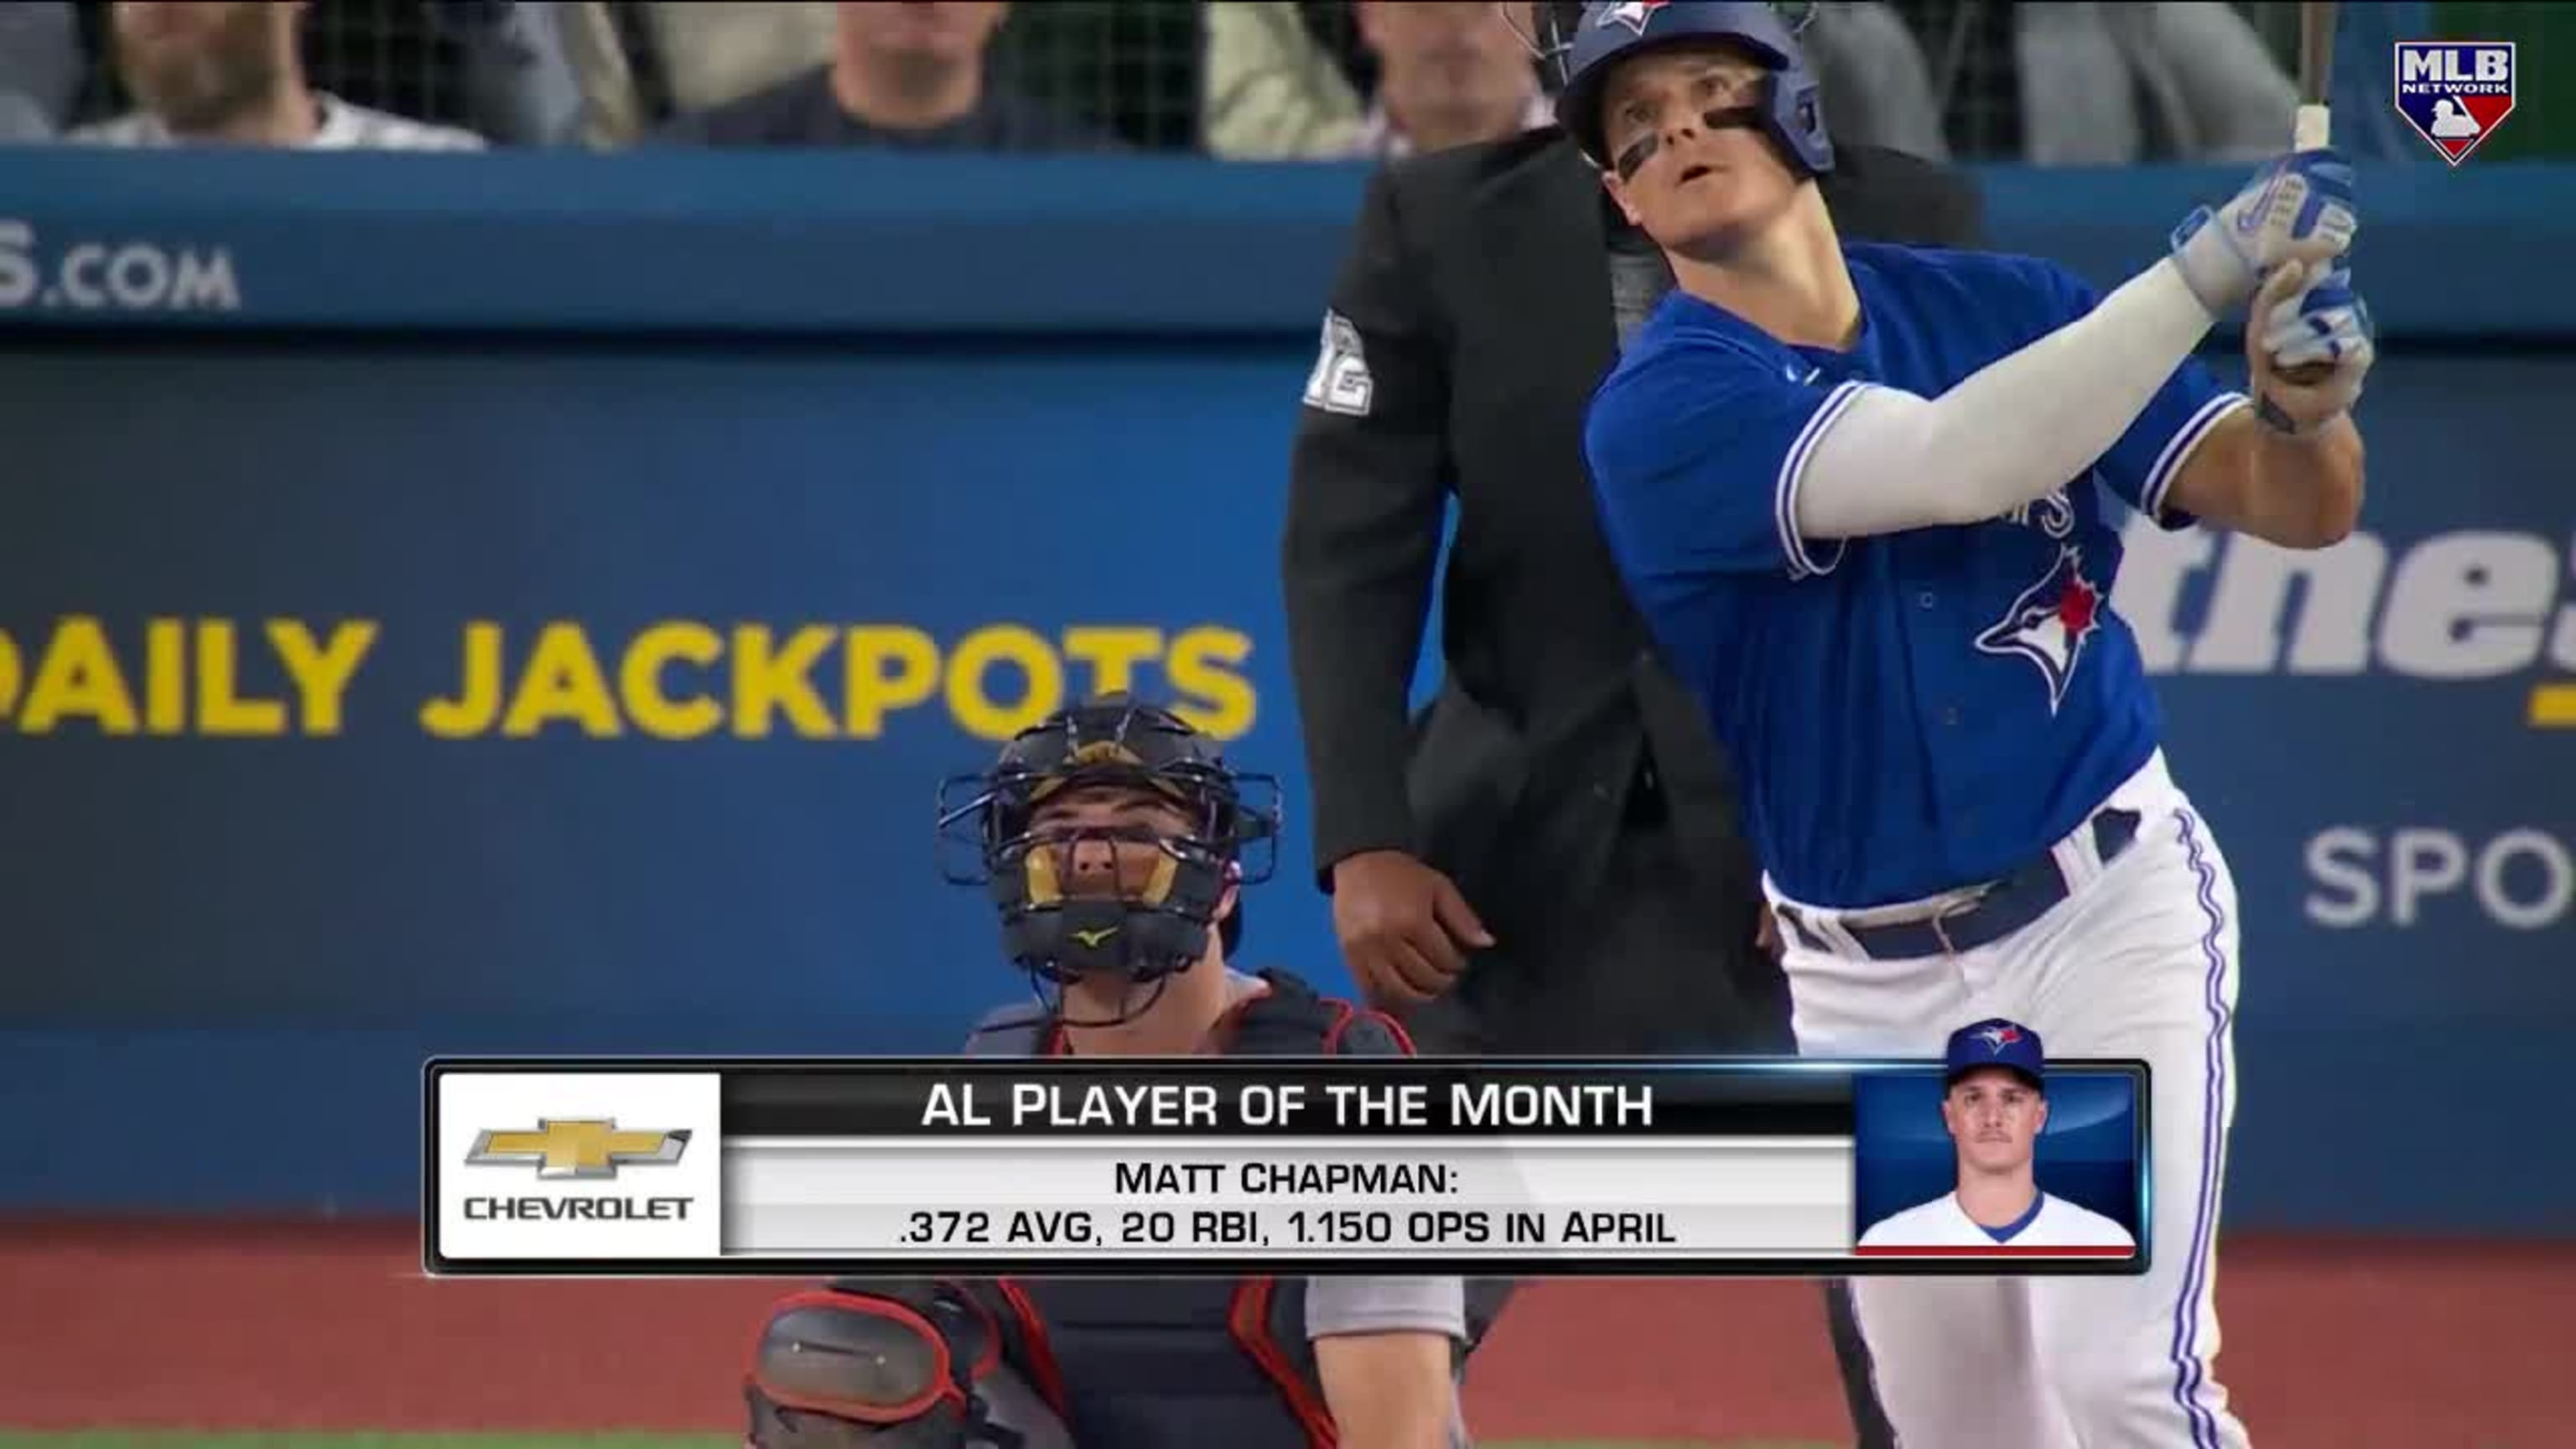 Our boy James Outman made the April Monthly Players list on MLB